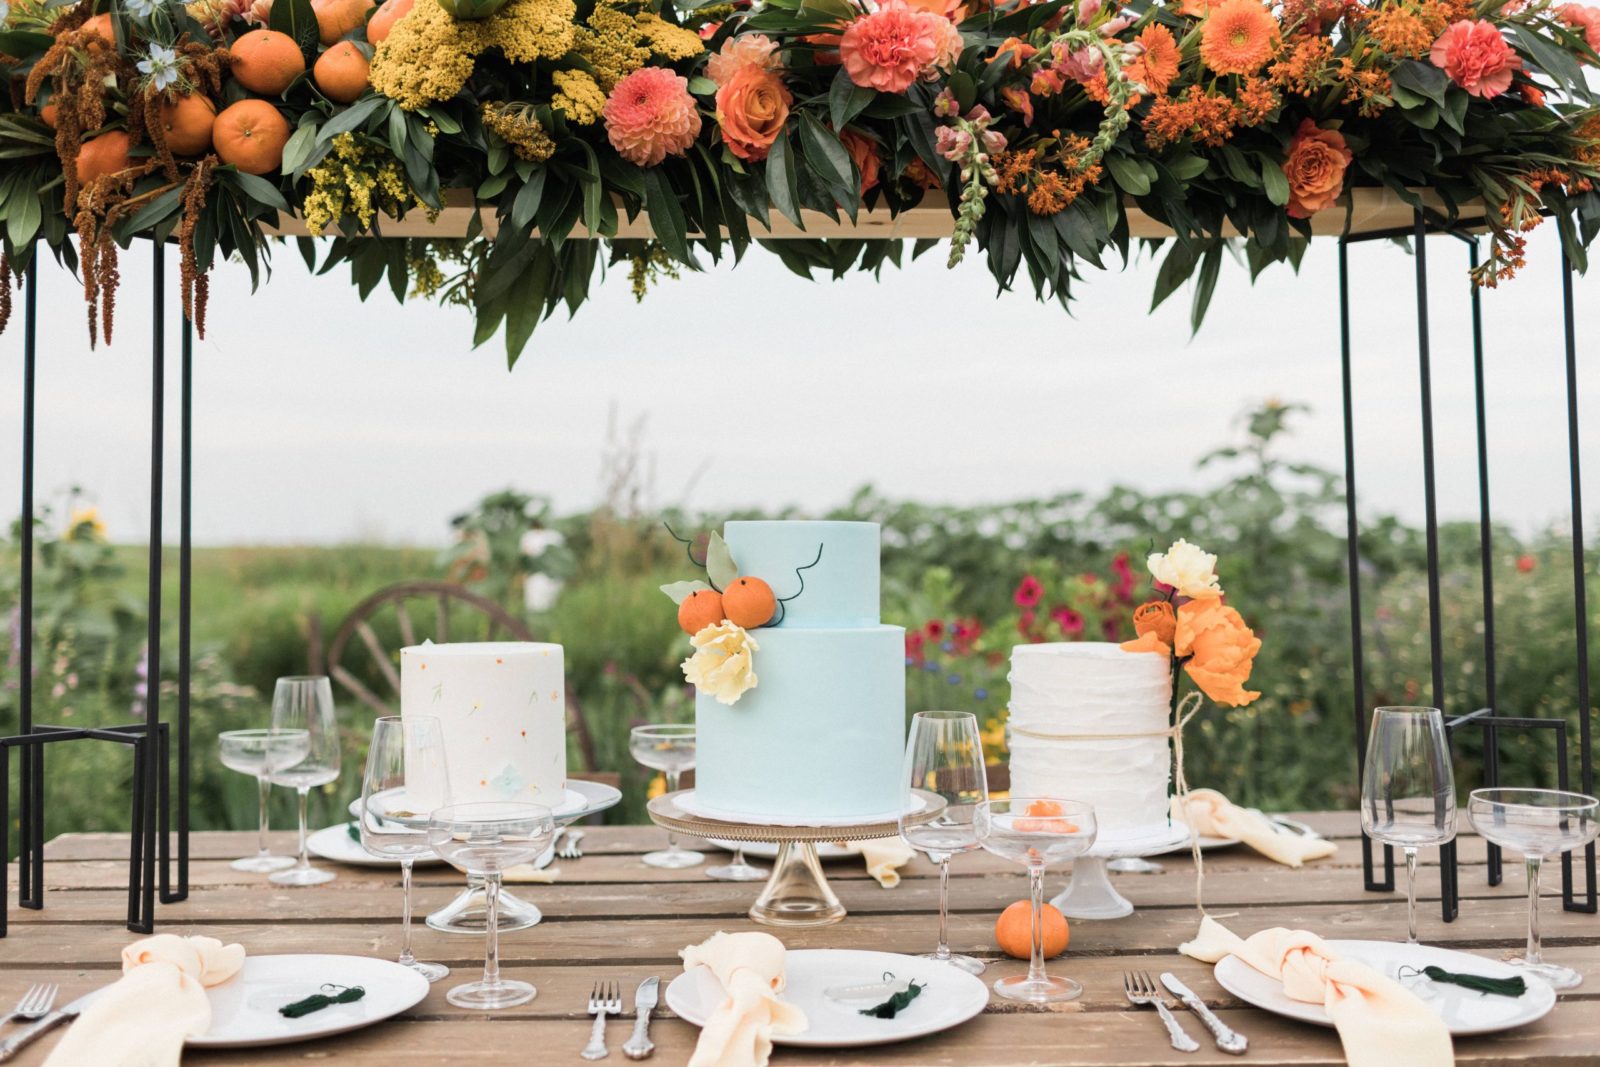 Flowers Galore at This Bright Clementine Garden Wedding at The Gathered Farm